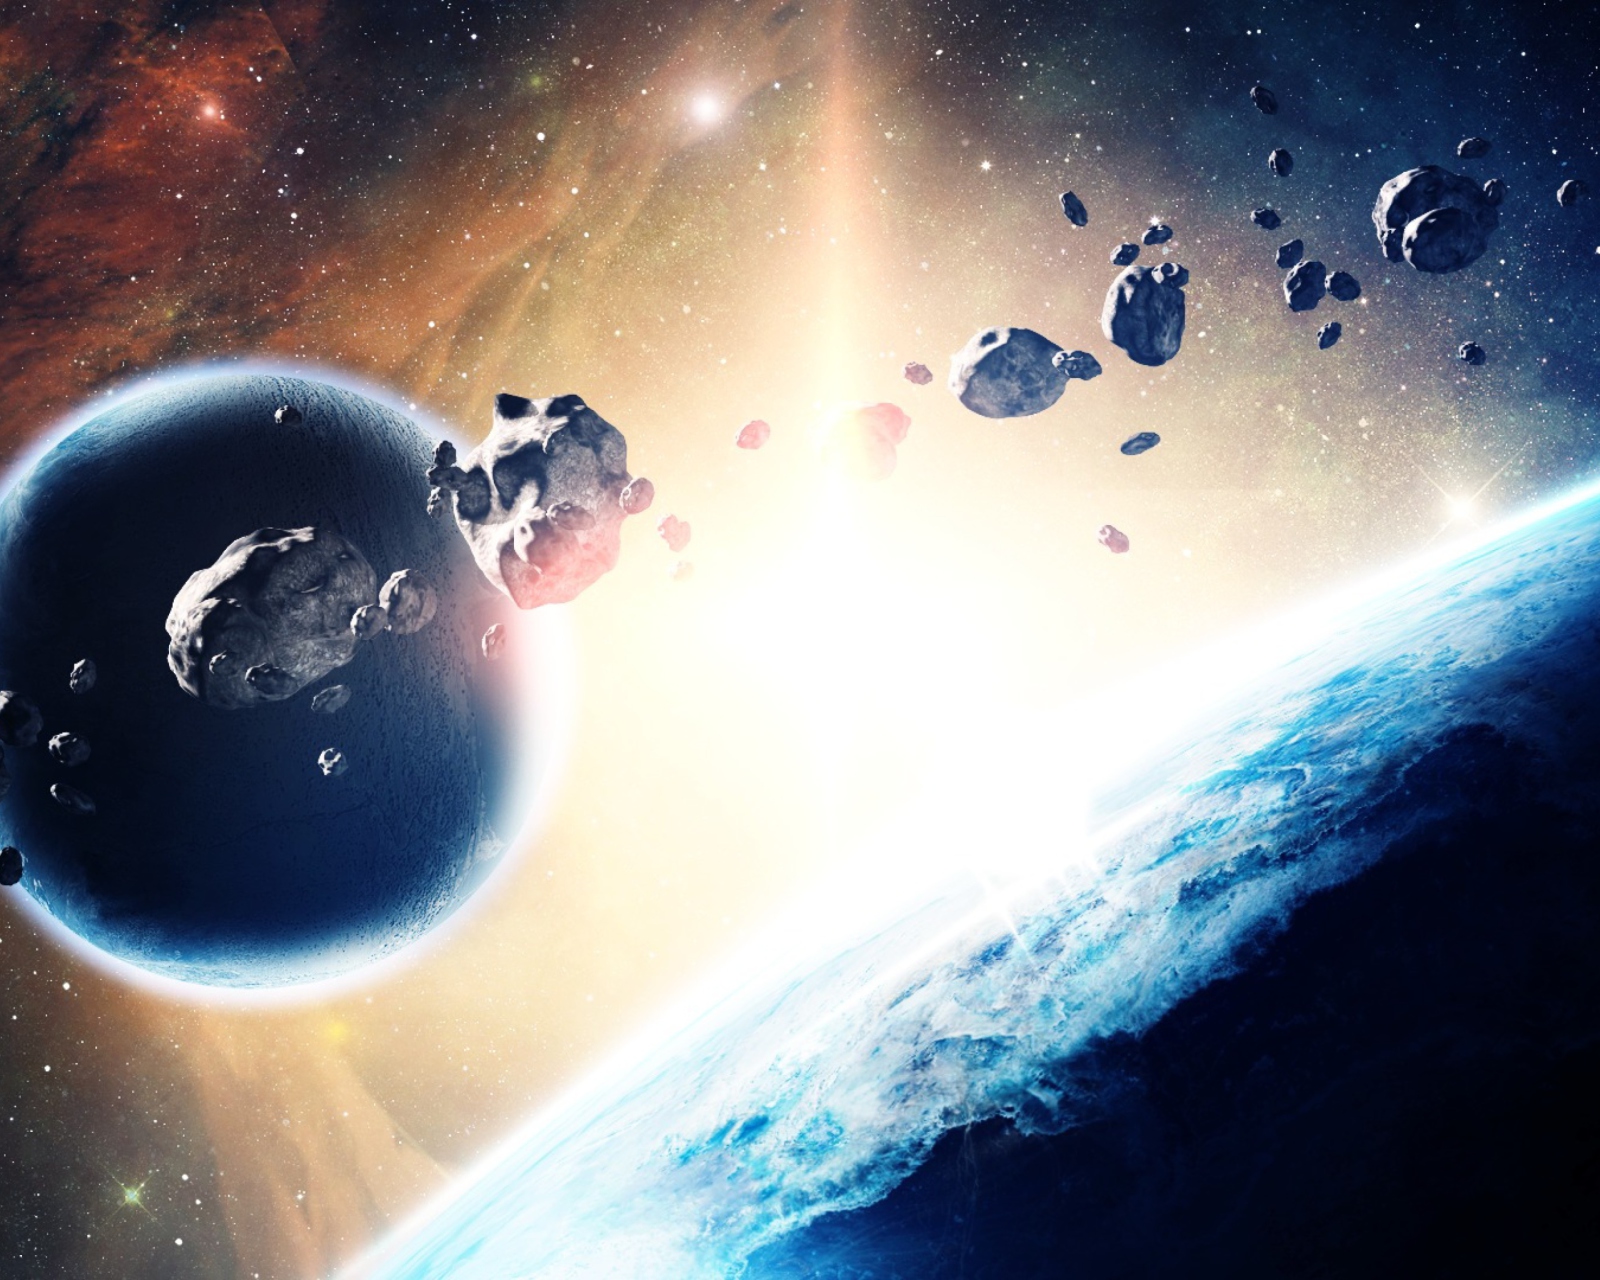 Asteroids In Space wallpaper 1600x1280